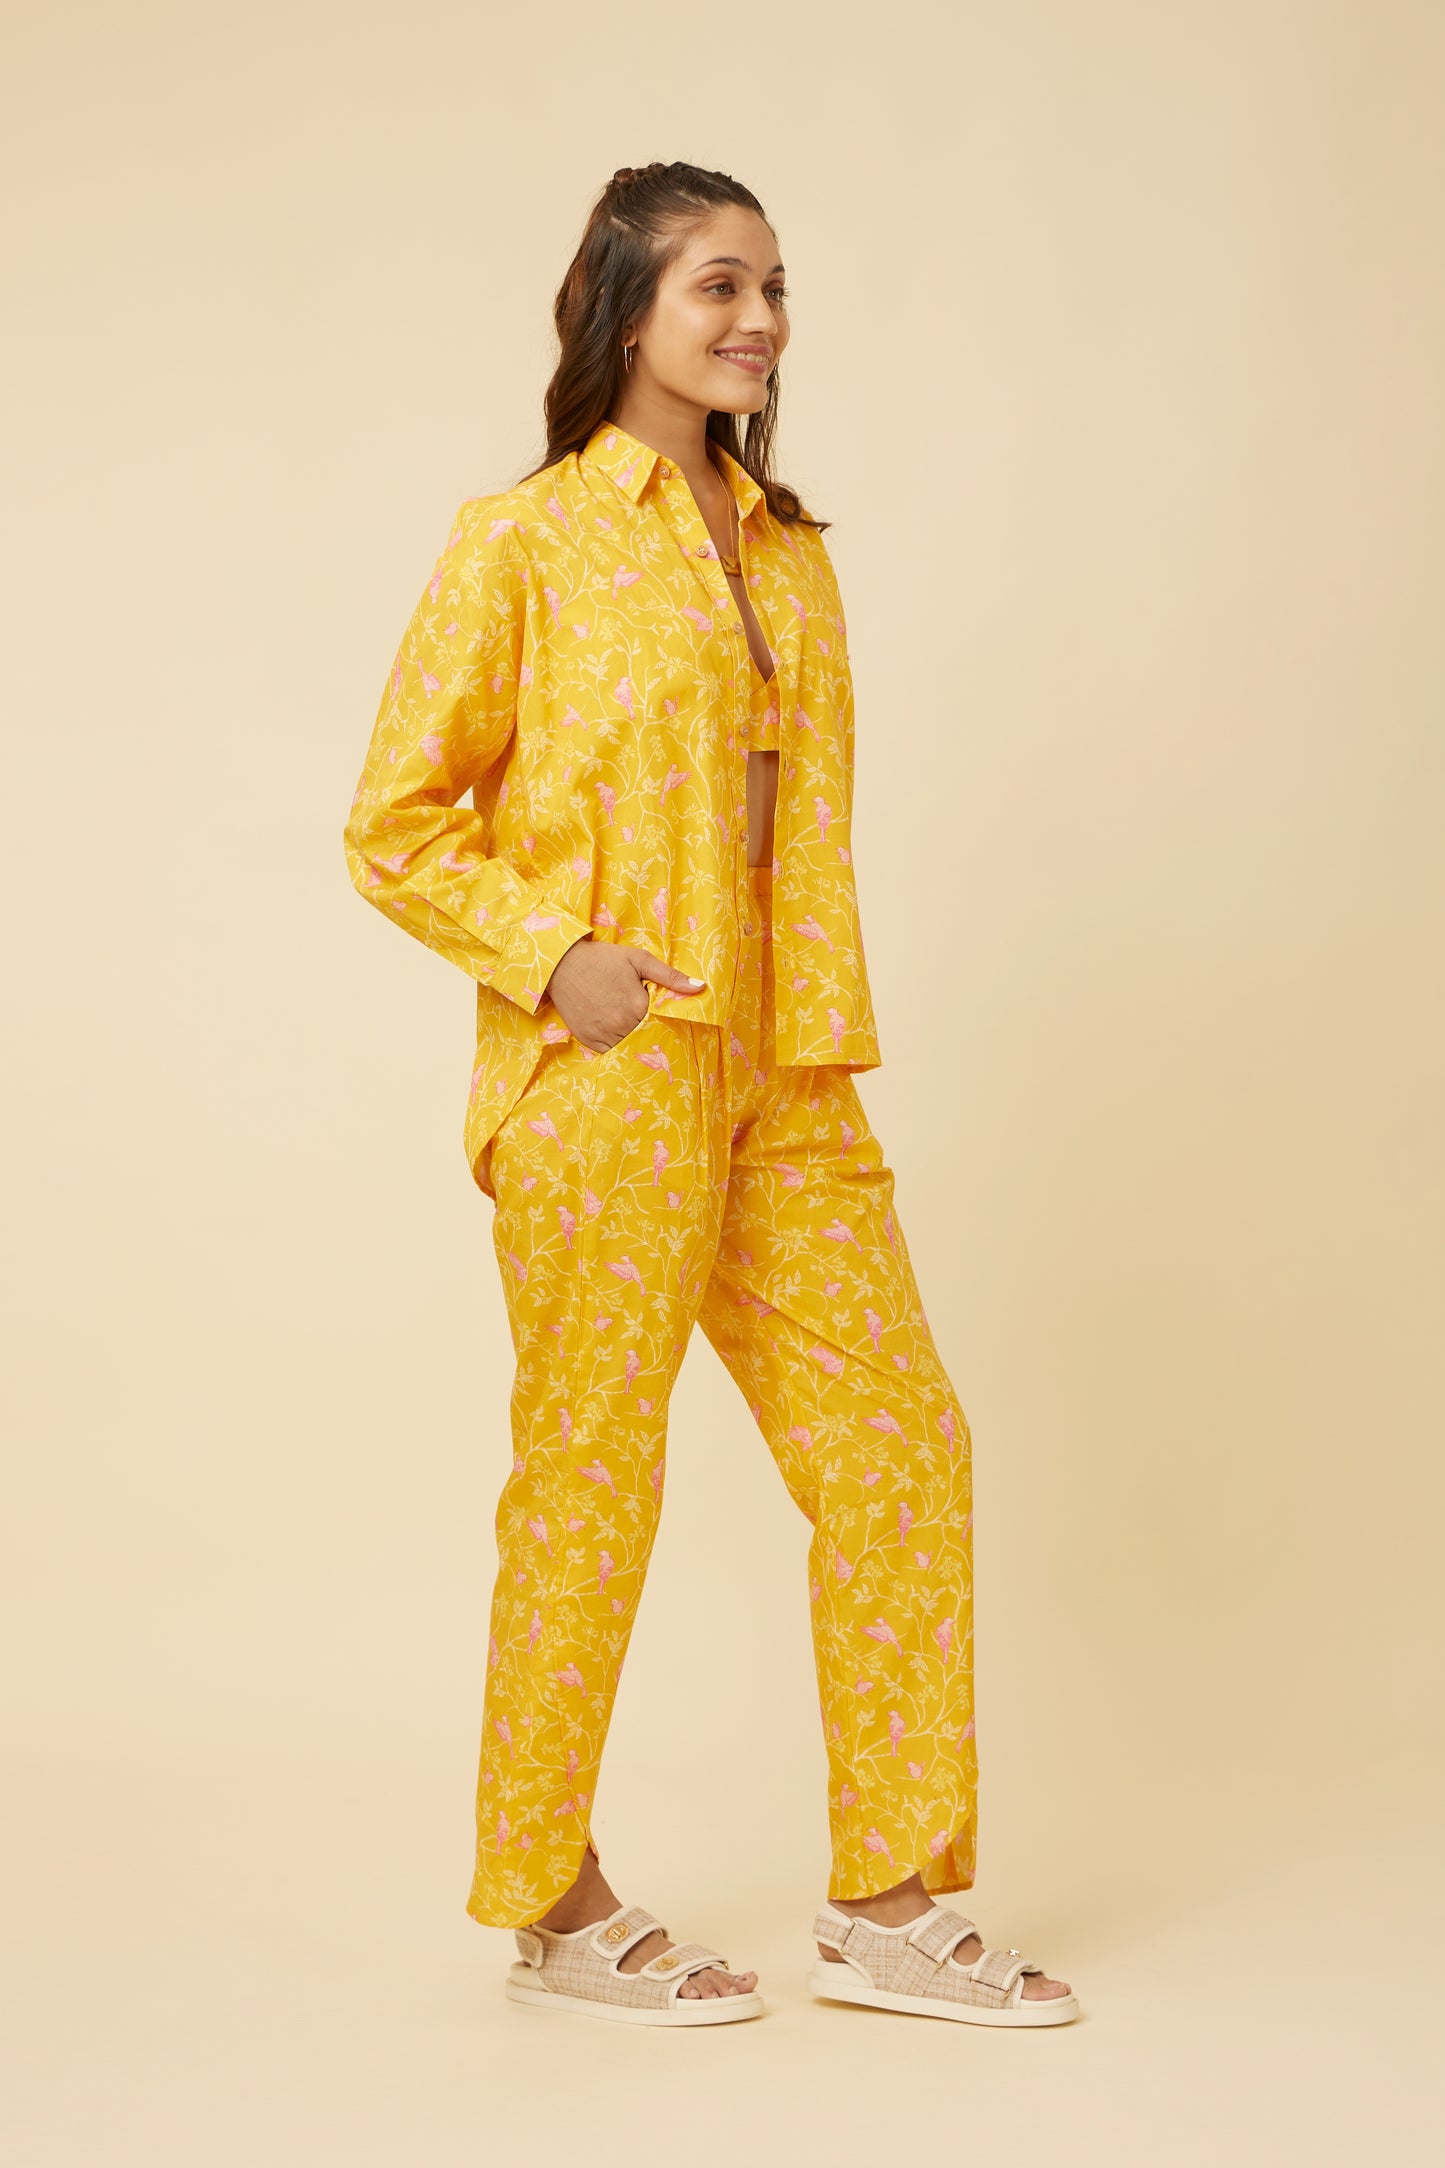 Side view of the relaxed-fit Peela Sunshine Full-Sleeve Shirt worn with coordinated pants, showing the option to wear the shirt tucked in or out